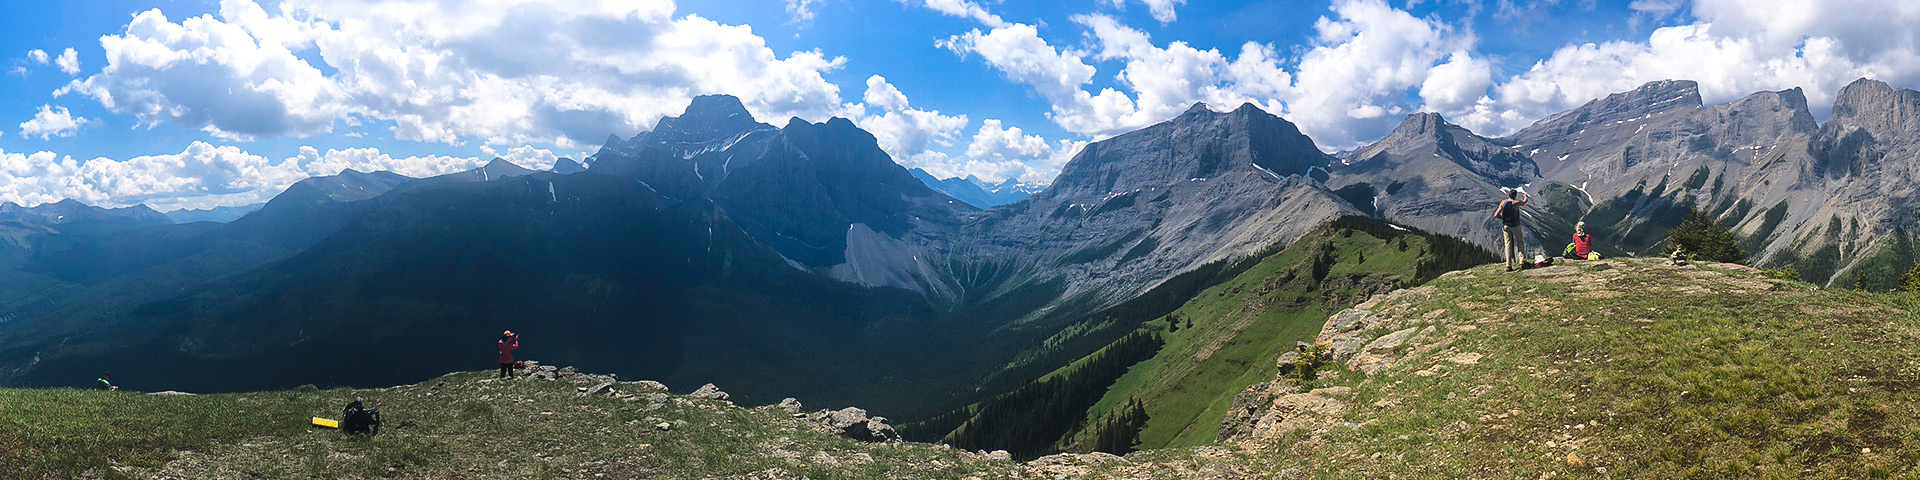 Best family-friendly hikes from Canmore, Alberta, Canada